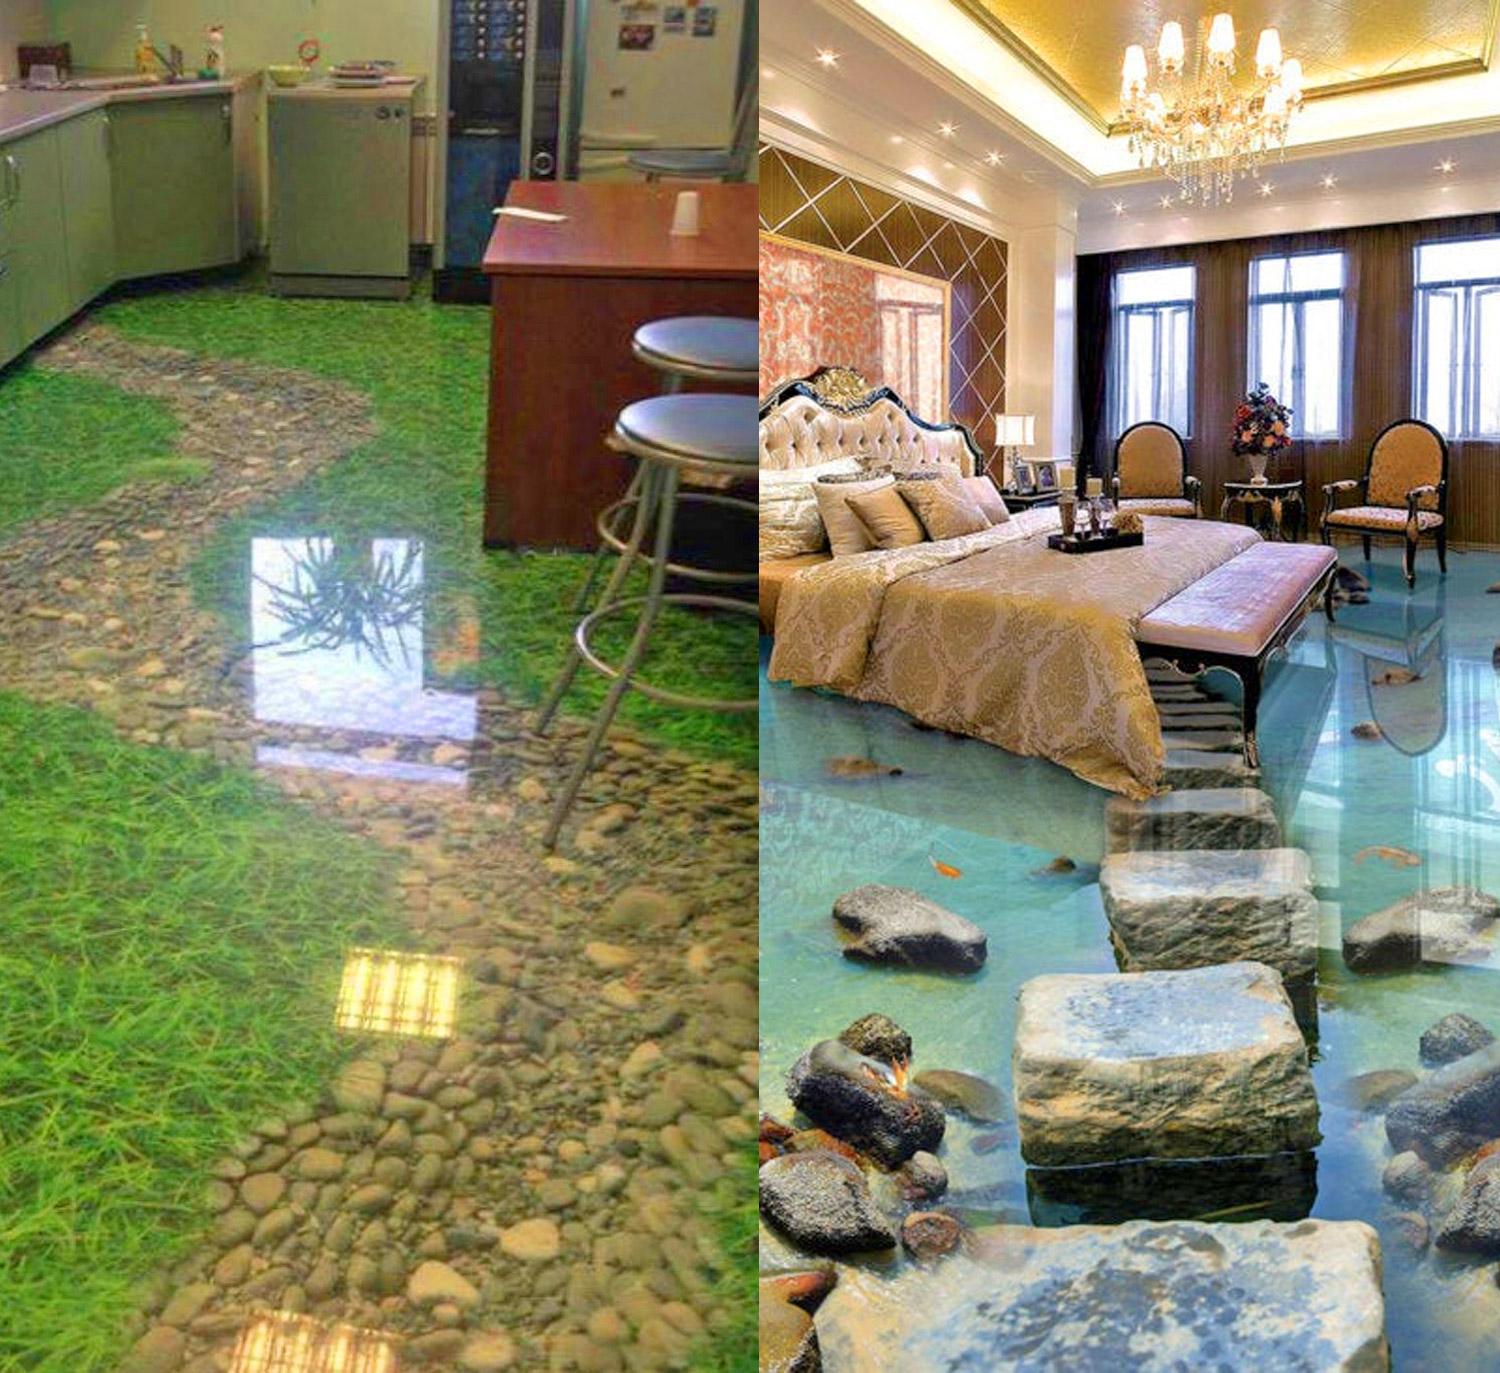 The realistic epoxy floor of a garden path and a lake with stones